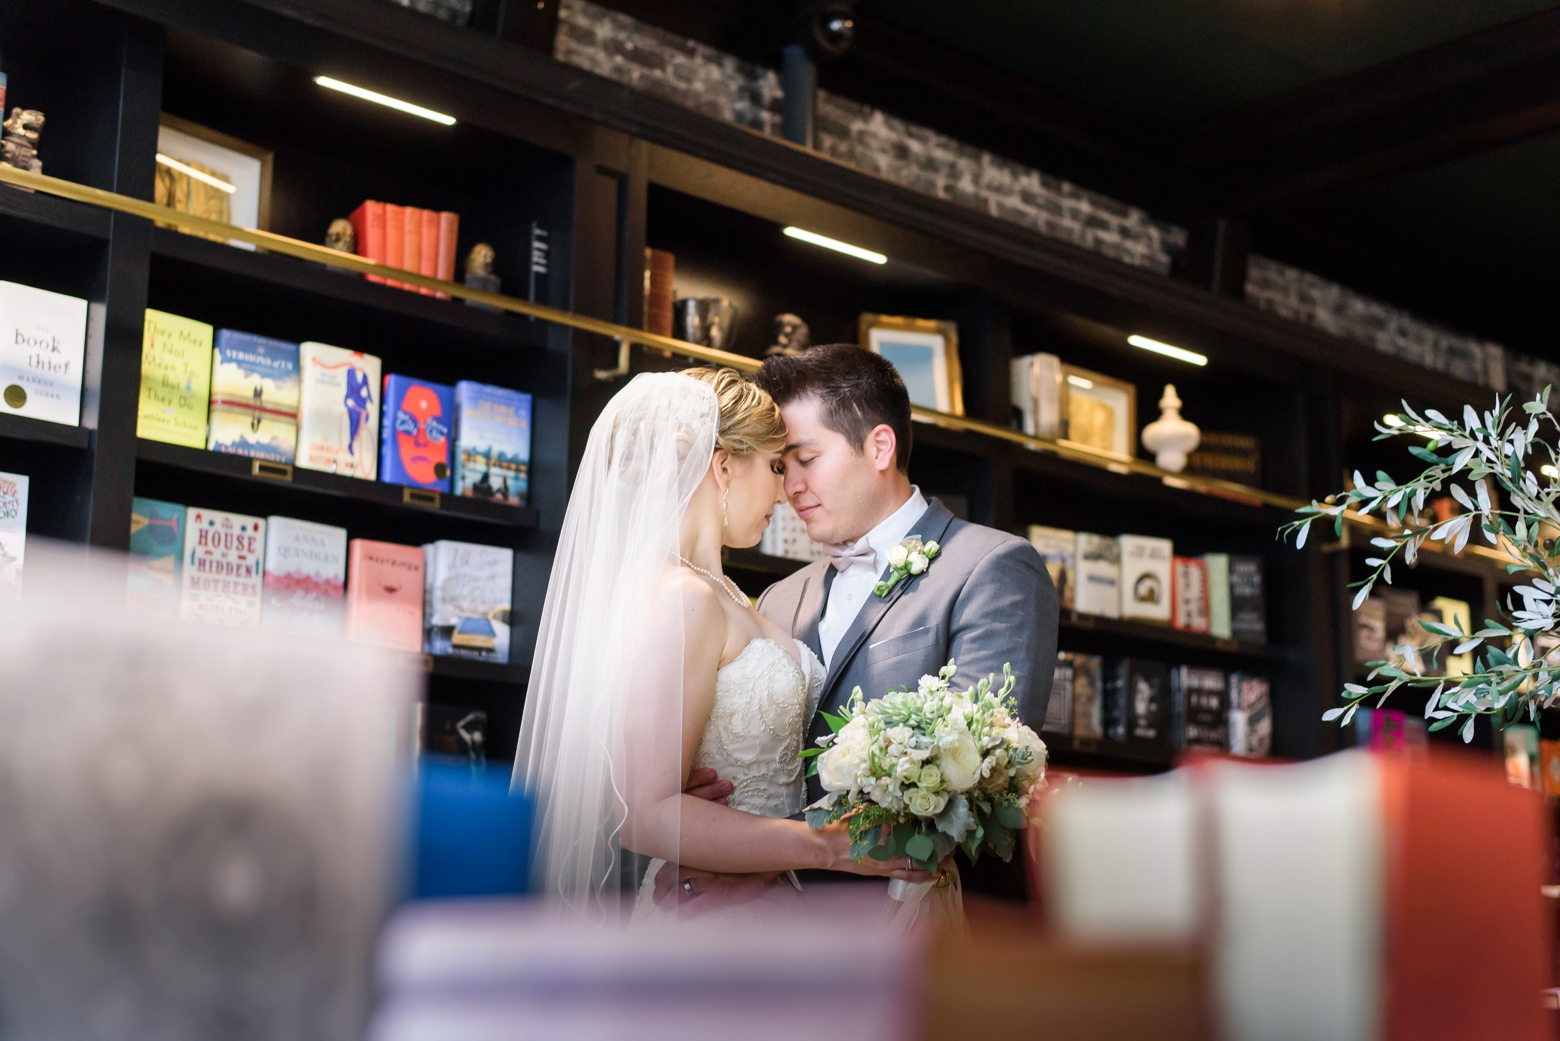 Bride and Groom share a quiet moment in the library of Oxford Exchange after their wedding